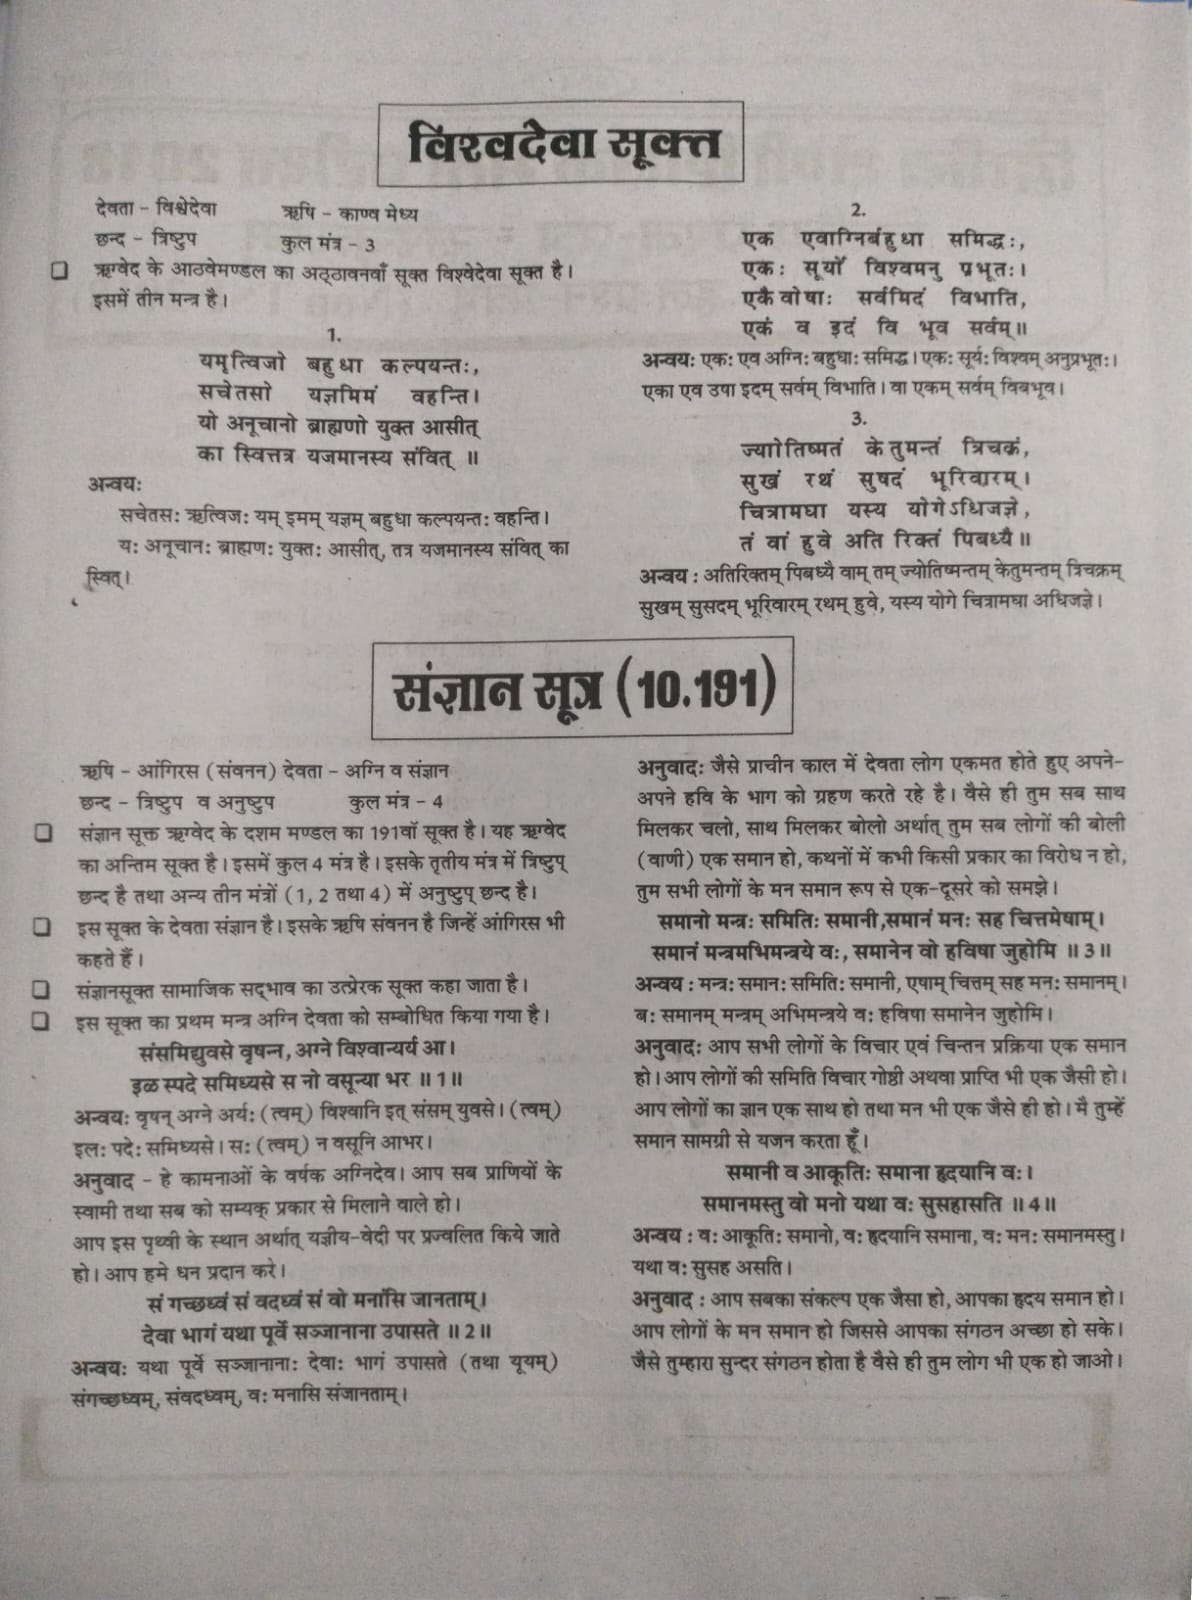 Herald Second Grade Sanskrit Solved And Model Paper By Mukesh Sharma For RPSC 2nd Grade Exam Latest Edition